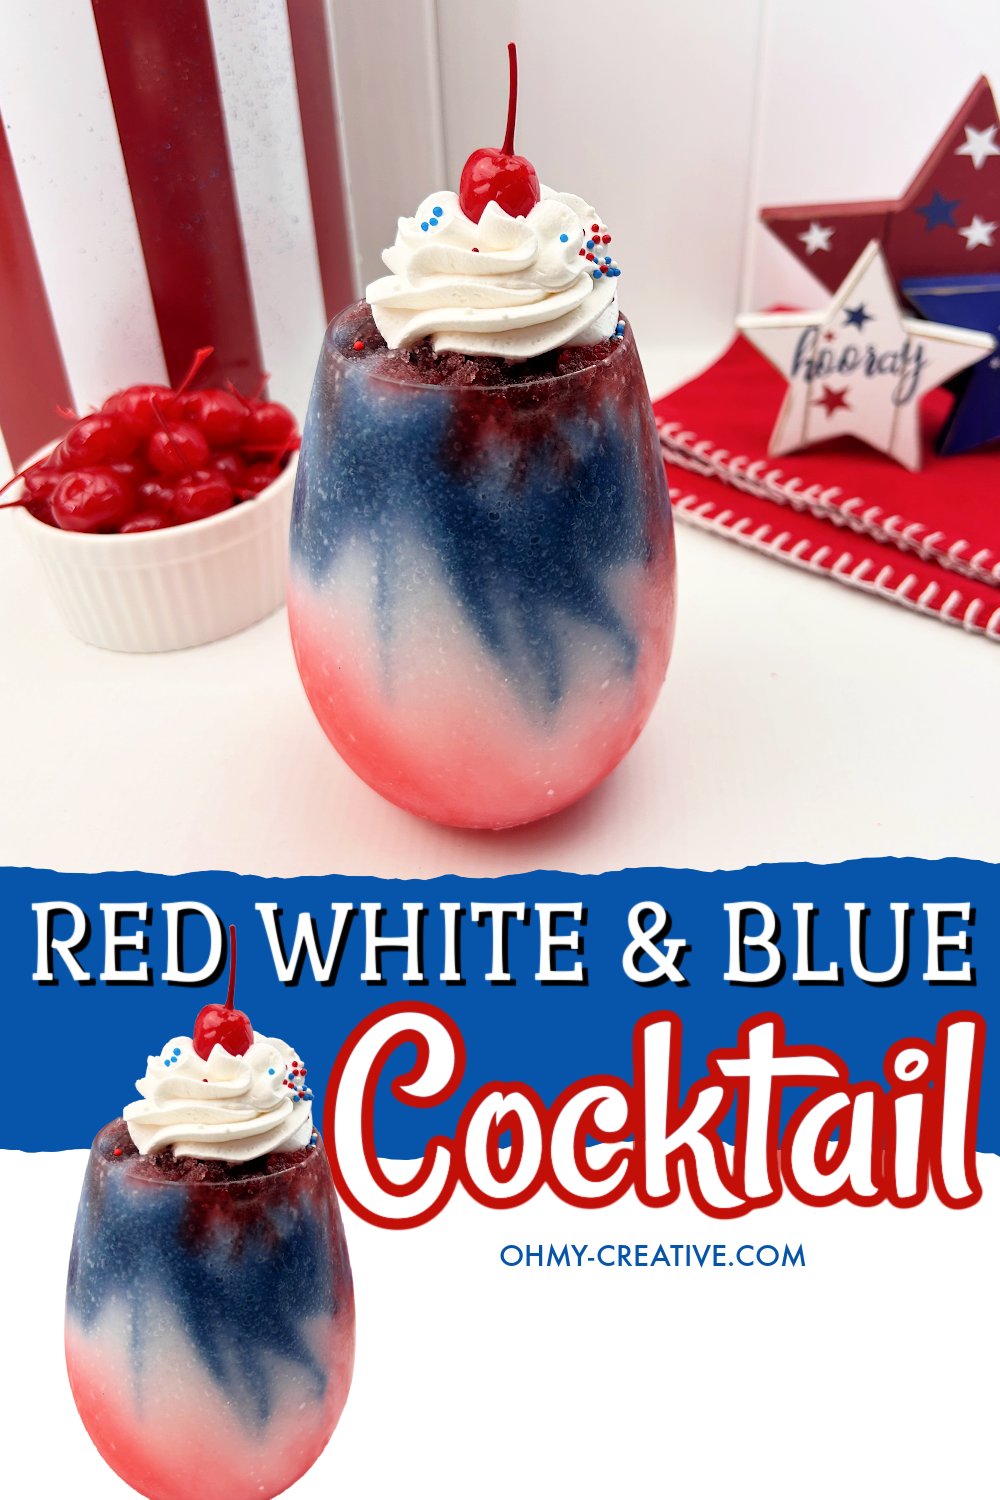 Featuring festive, patriotic colors, this Red White, And Blue Cocktail is like frozen slushy with red on the bottom and blue on the top layer with whipped cream and a cherry on top. Added are patriotic sprinkles. A bowl of extra cherries are off to the side.